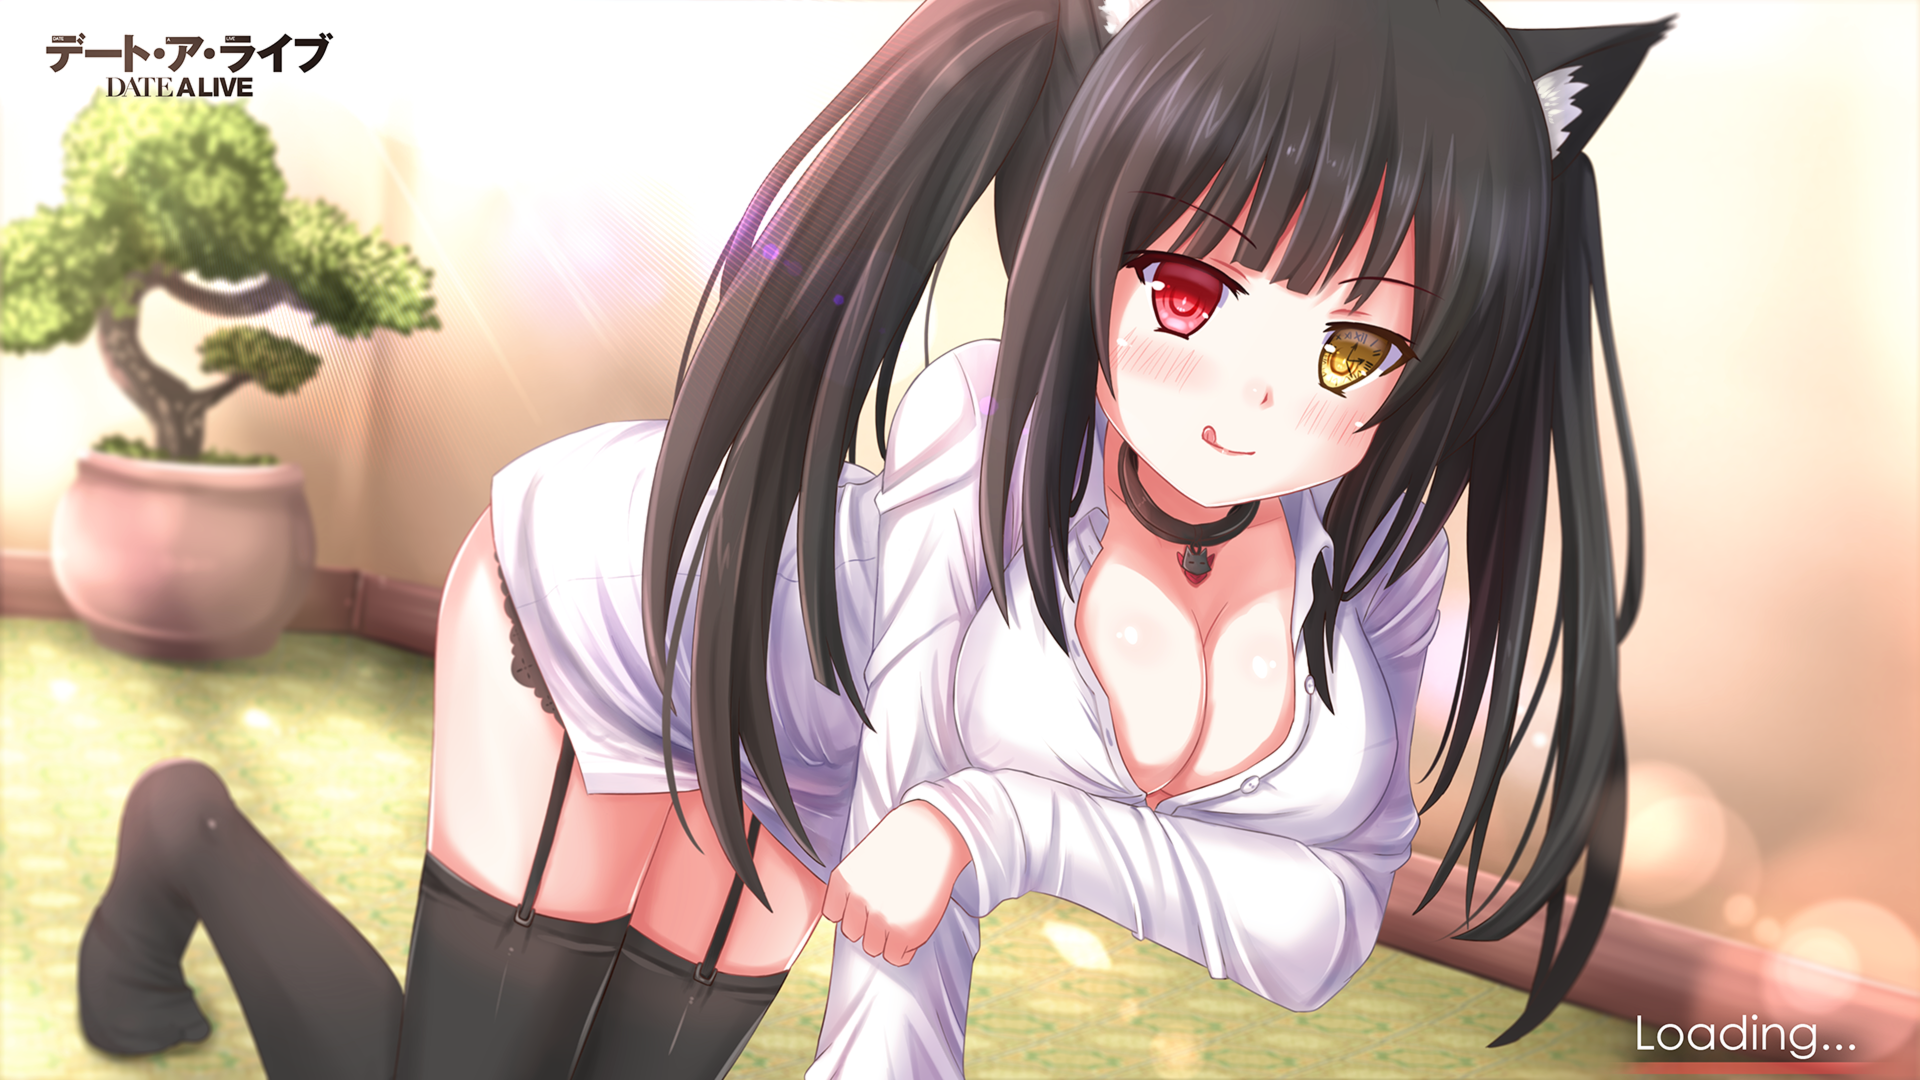 Anime 1920x1080 anime girls Tokisaki Kurumi Date A Live animal ears heterochromia cleavage necklace big boobs kneeling stockings boobs bent over tongues tongue out dark hair long hair legs together black stockings